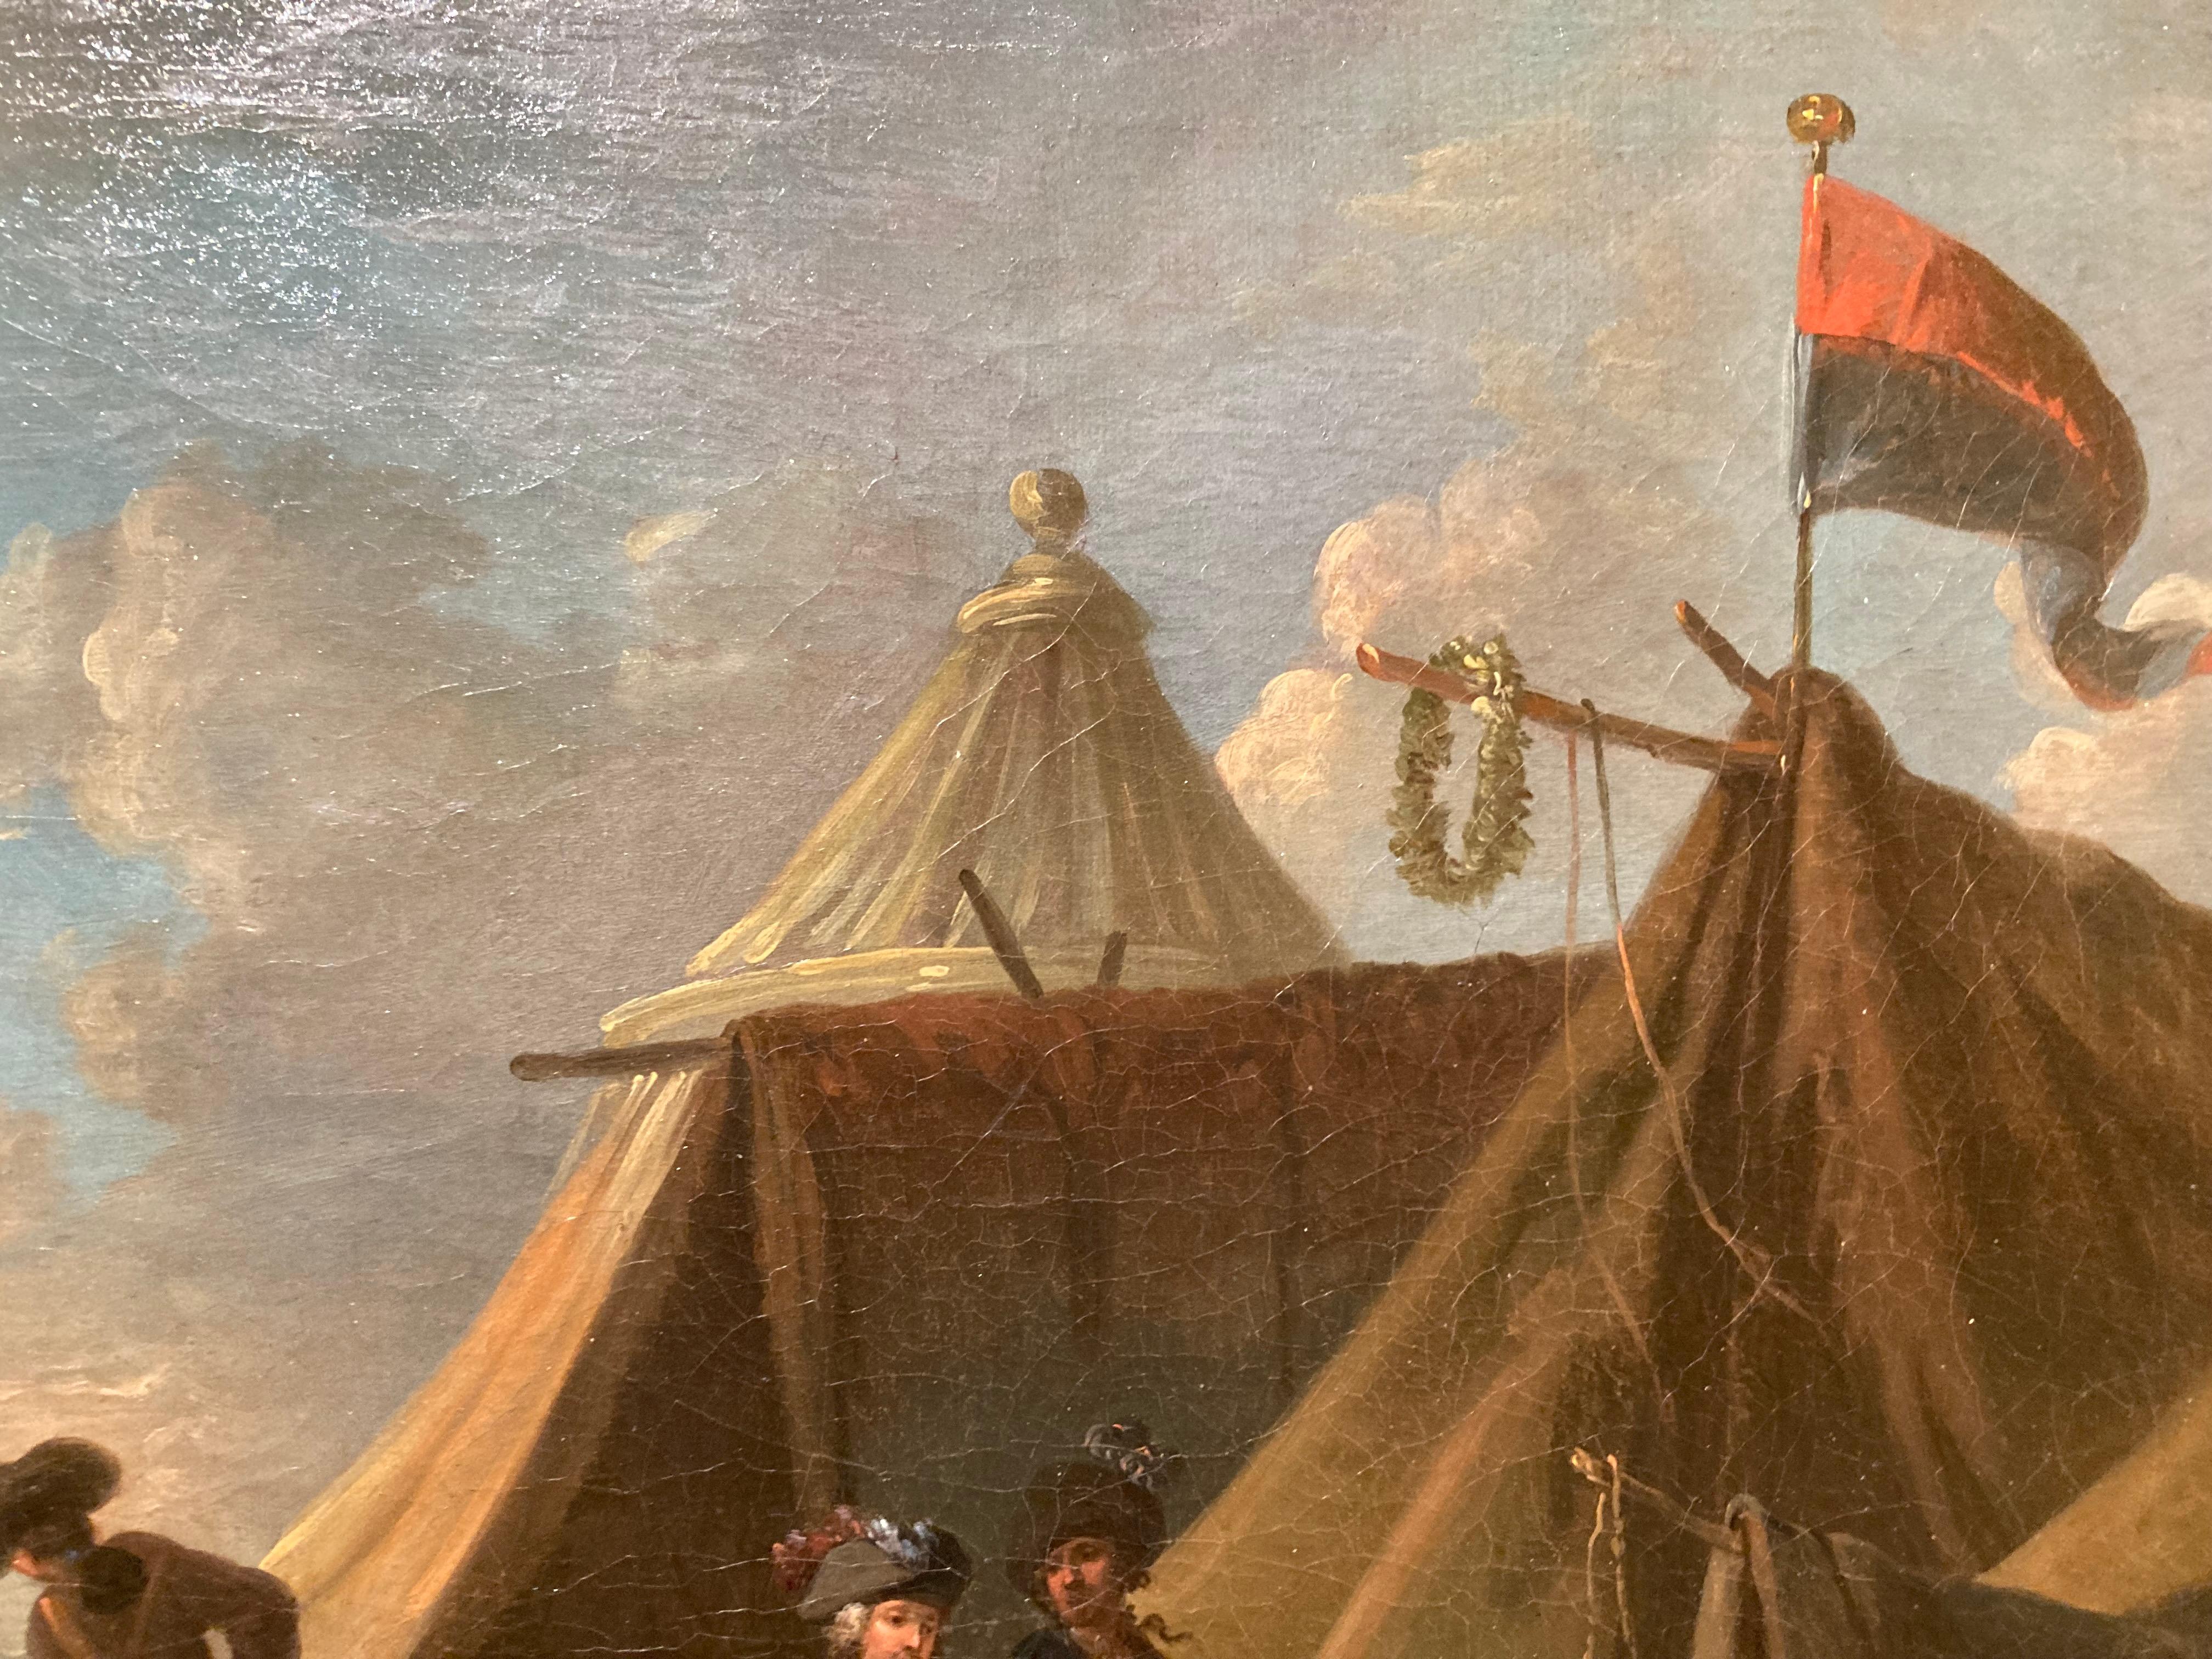 Soldiers by a Tent, Soldiers Camp, Circle Van Huchtenburg, Old Master Painting For Sale 2